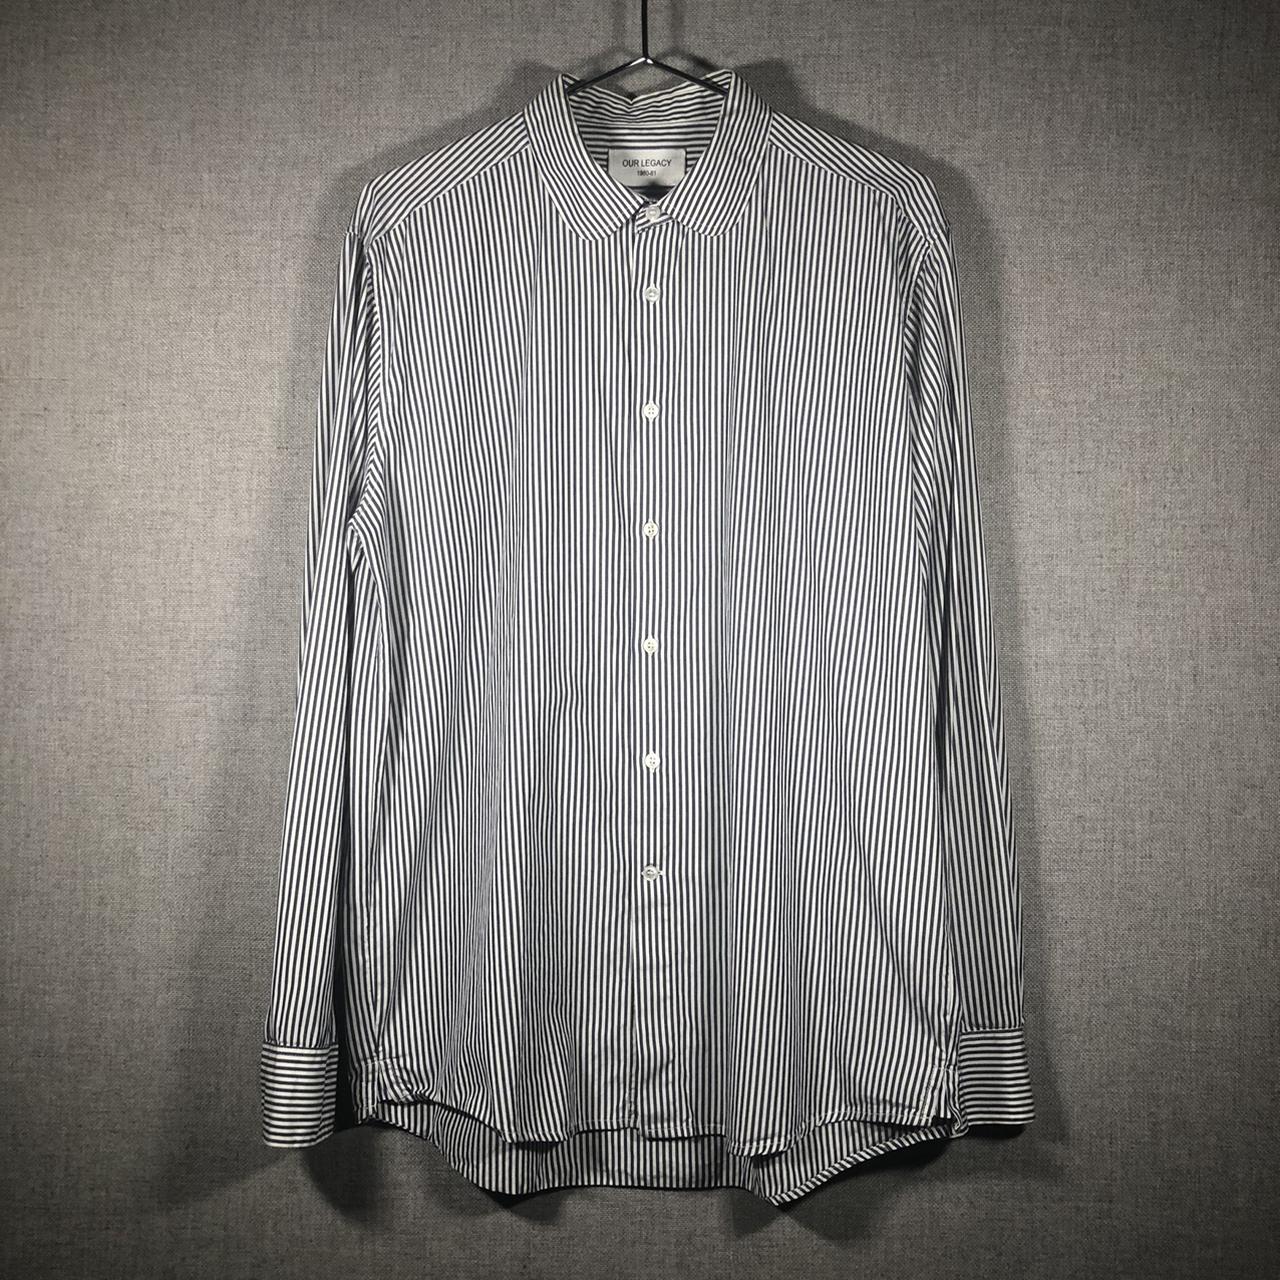 Our Legacy Men's White and Grey Shirt